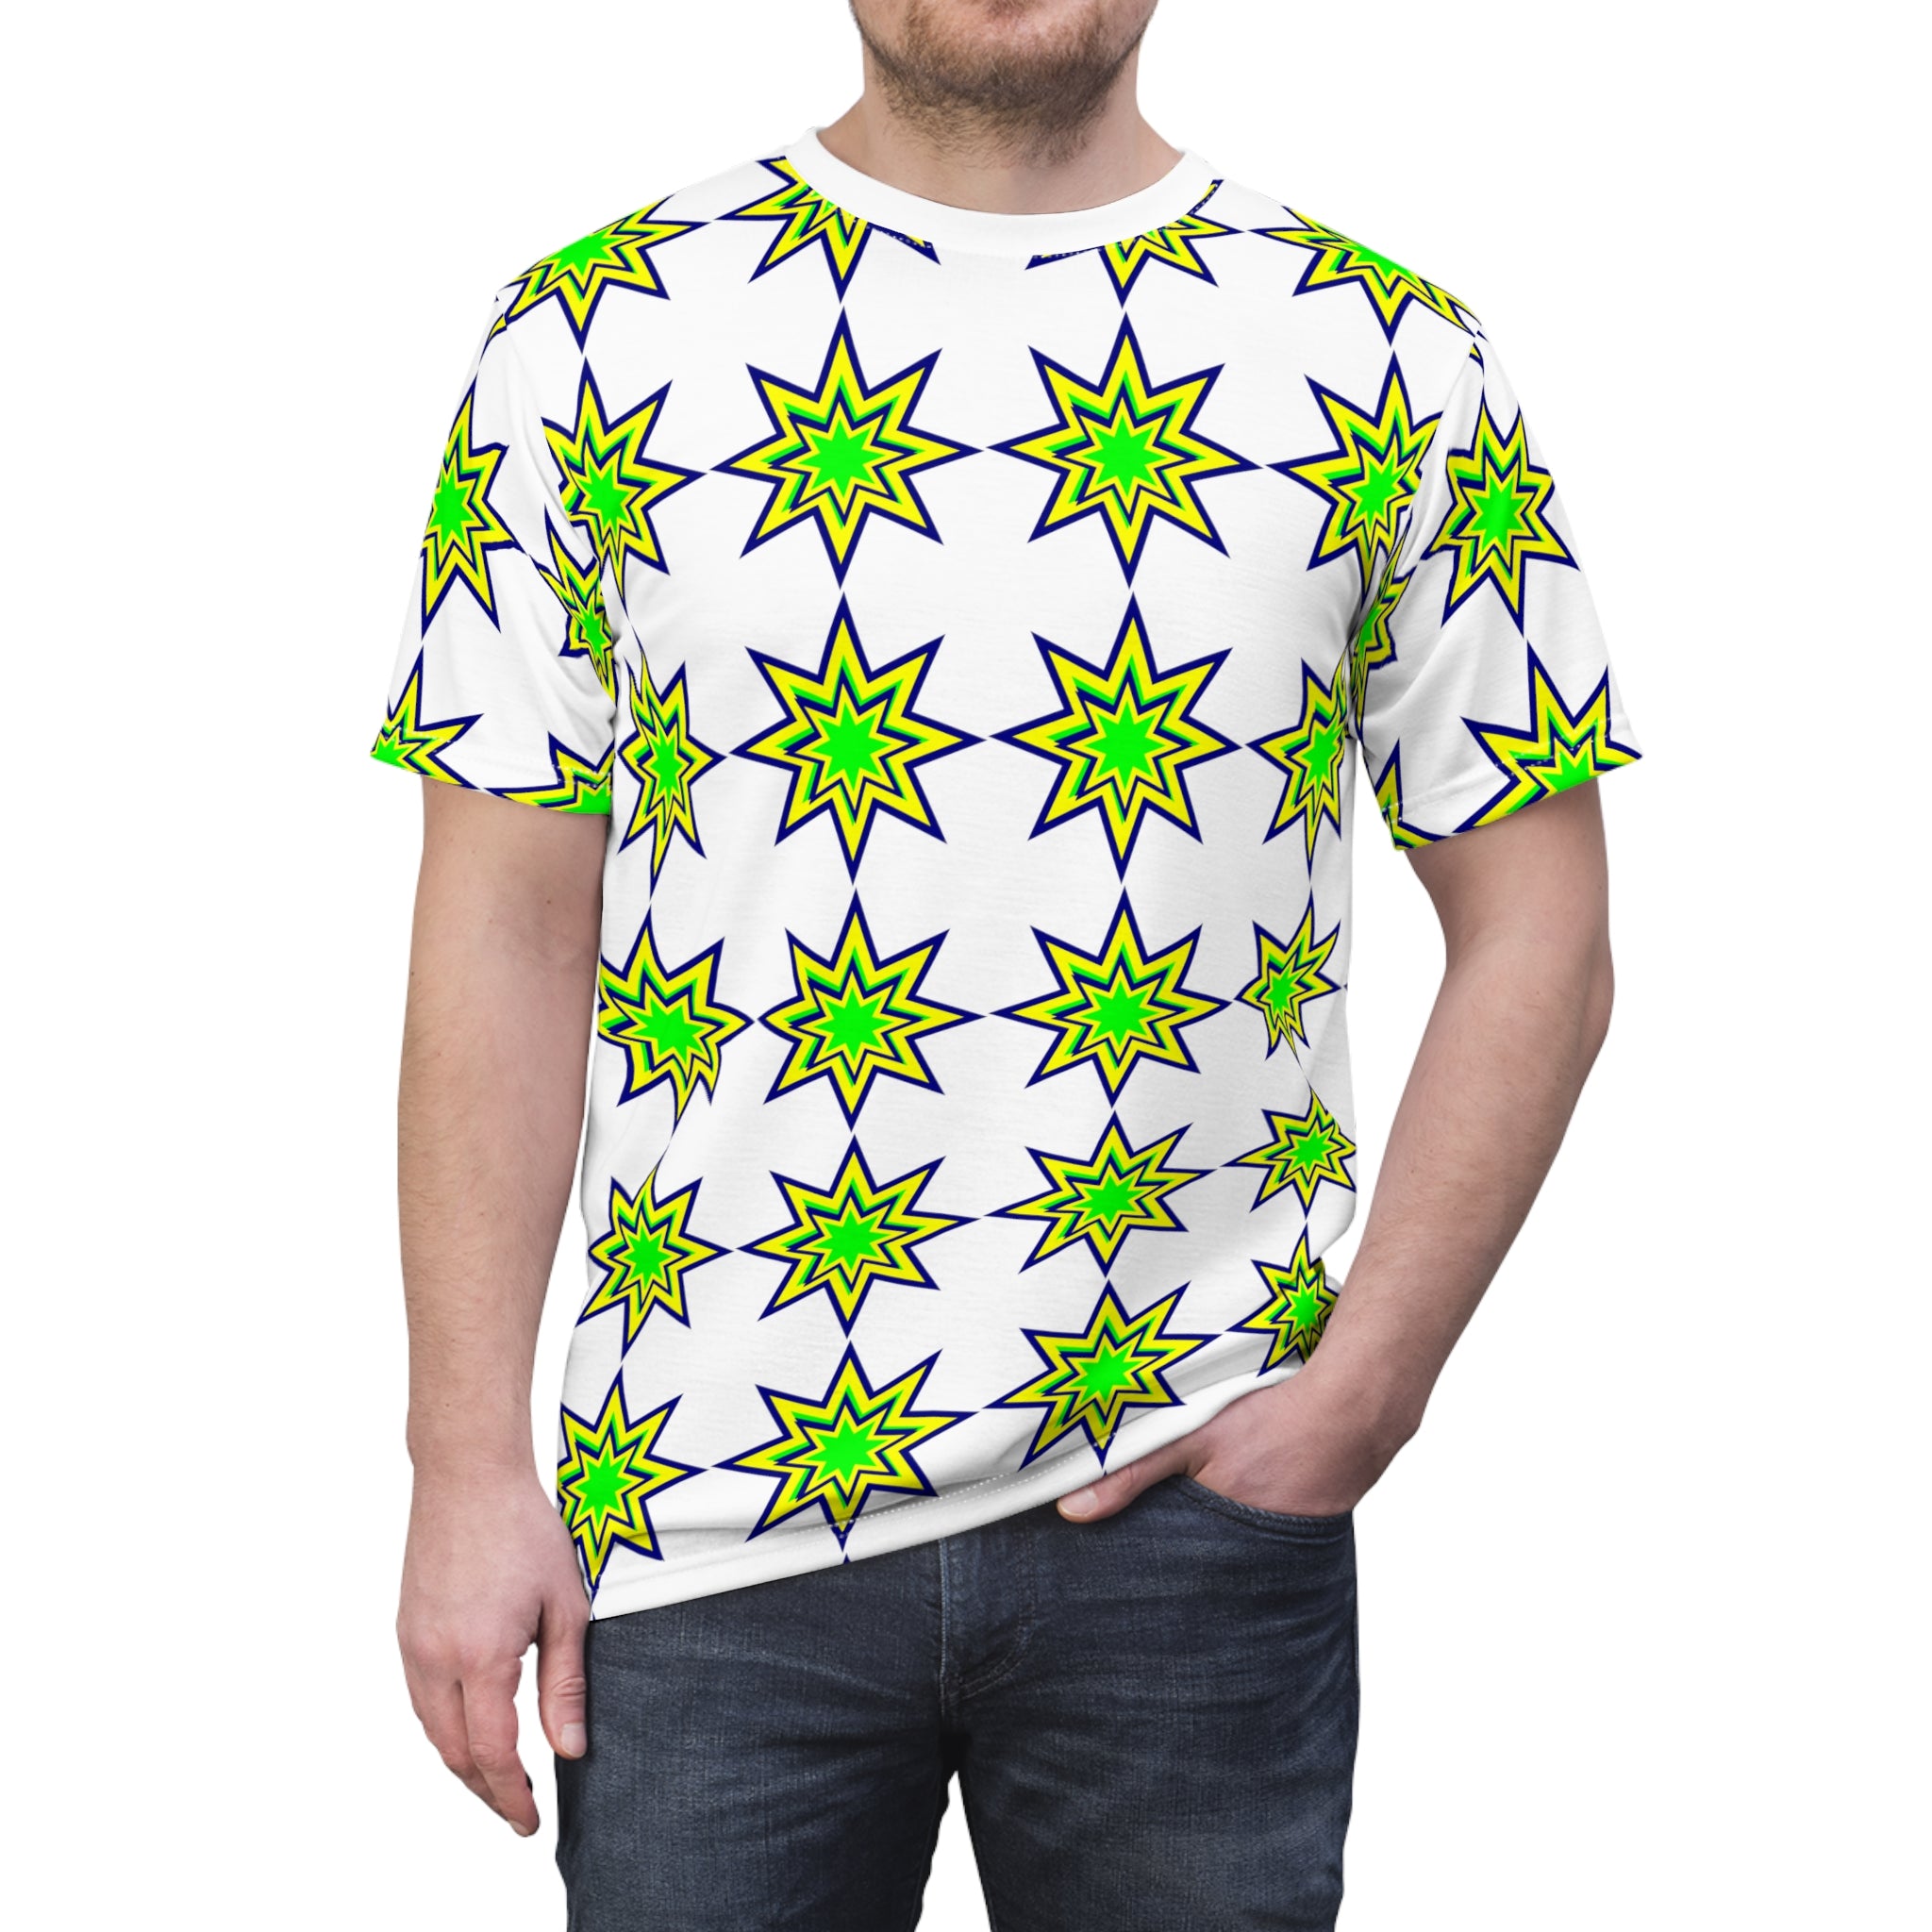 St. Vincent and the Grenadines Stars Unisex Cut & Sew White Tee (AOP), St. Vincent and the Grenadines National Colors,  St. Vincent and Grenadines Independence Shirt